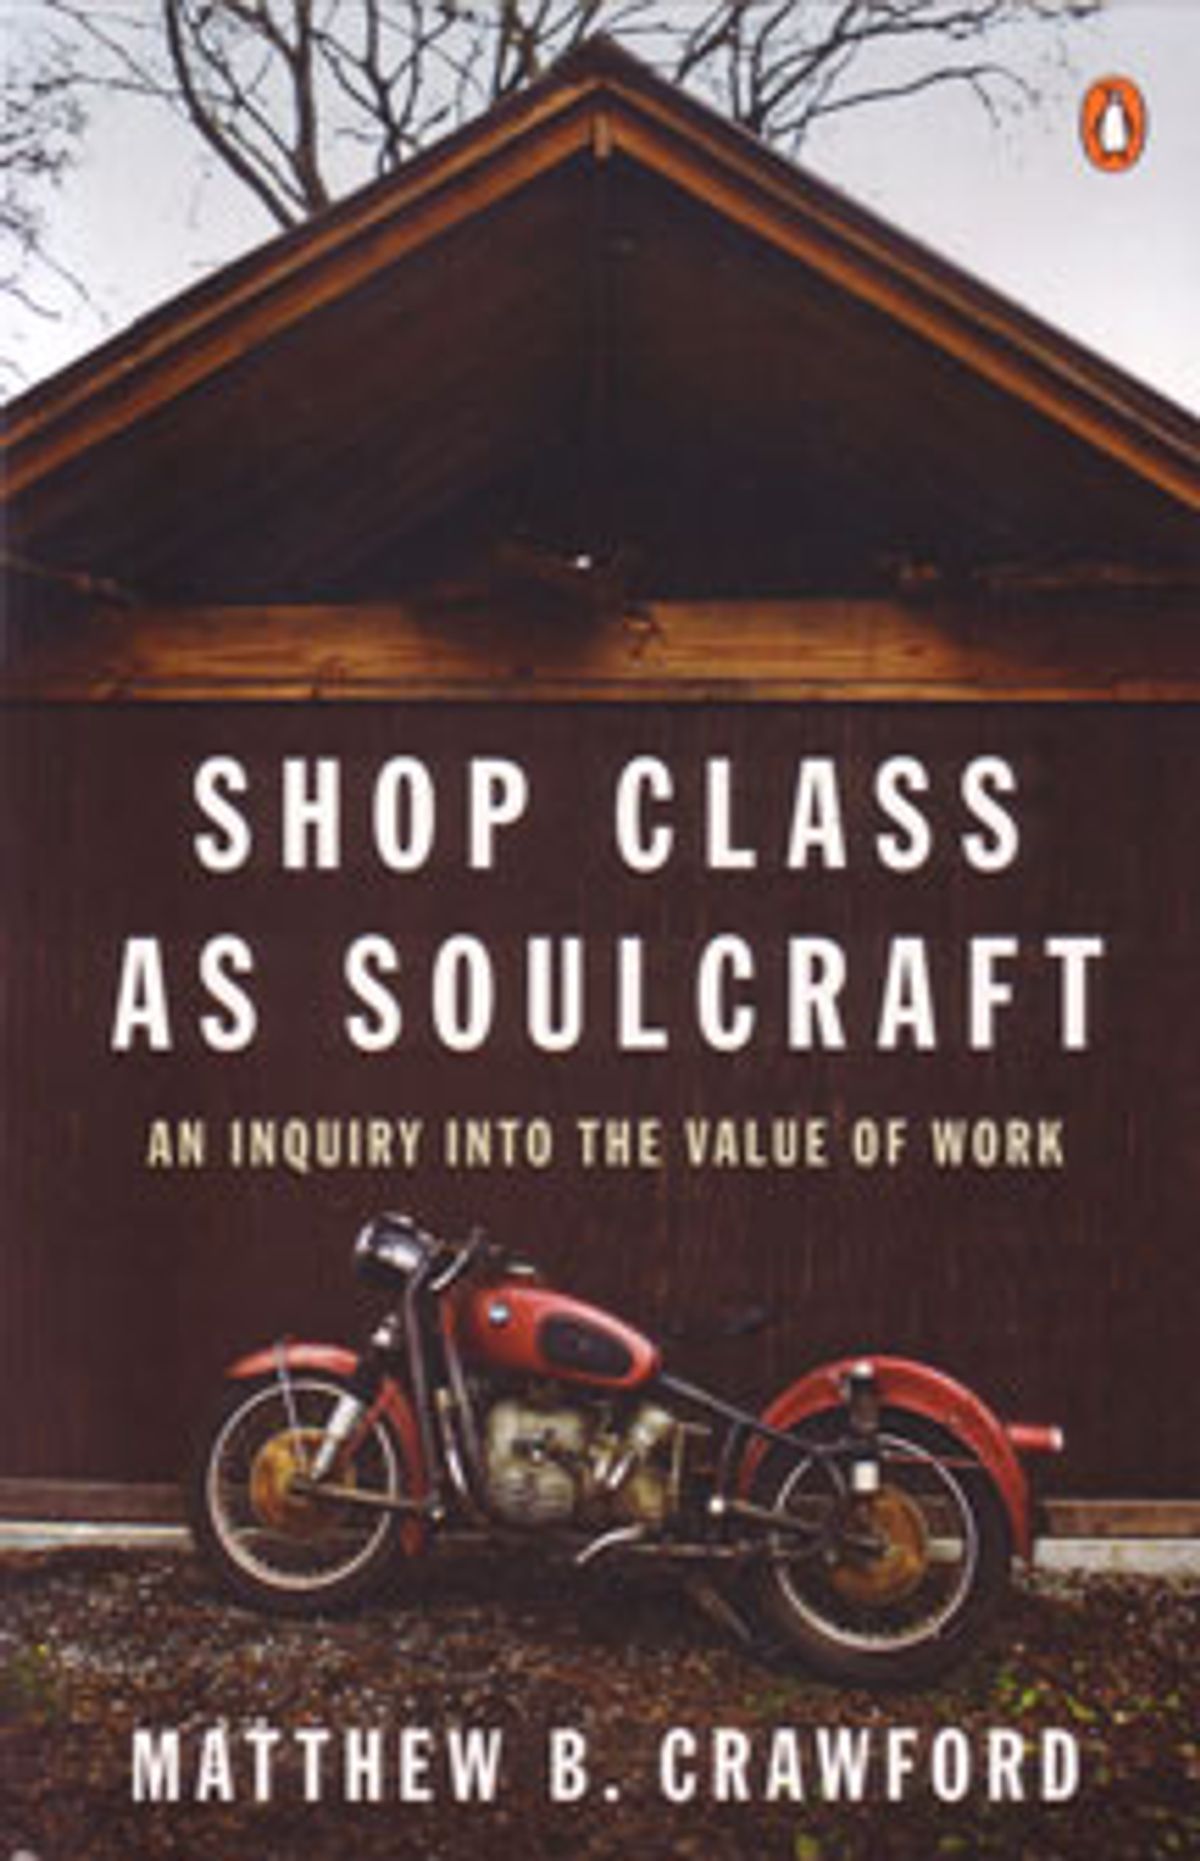 Book Review: Shop Class as Soulcraft: An Inquiry Into the Value of Work